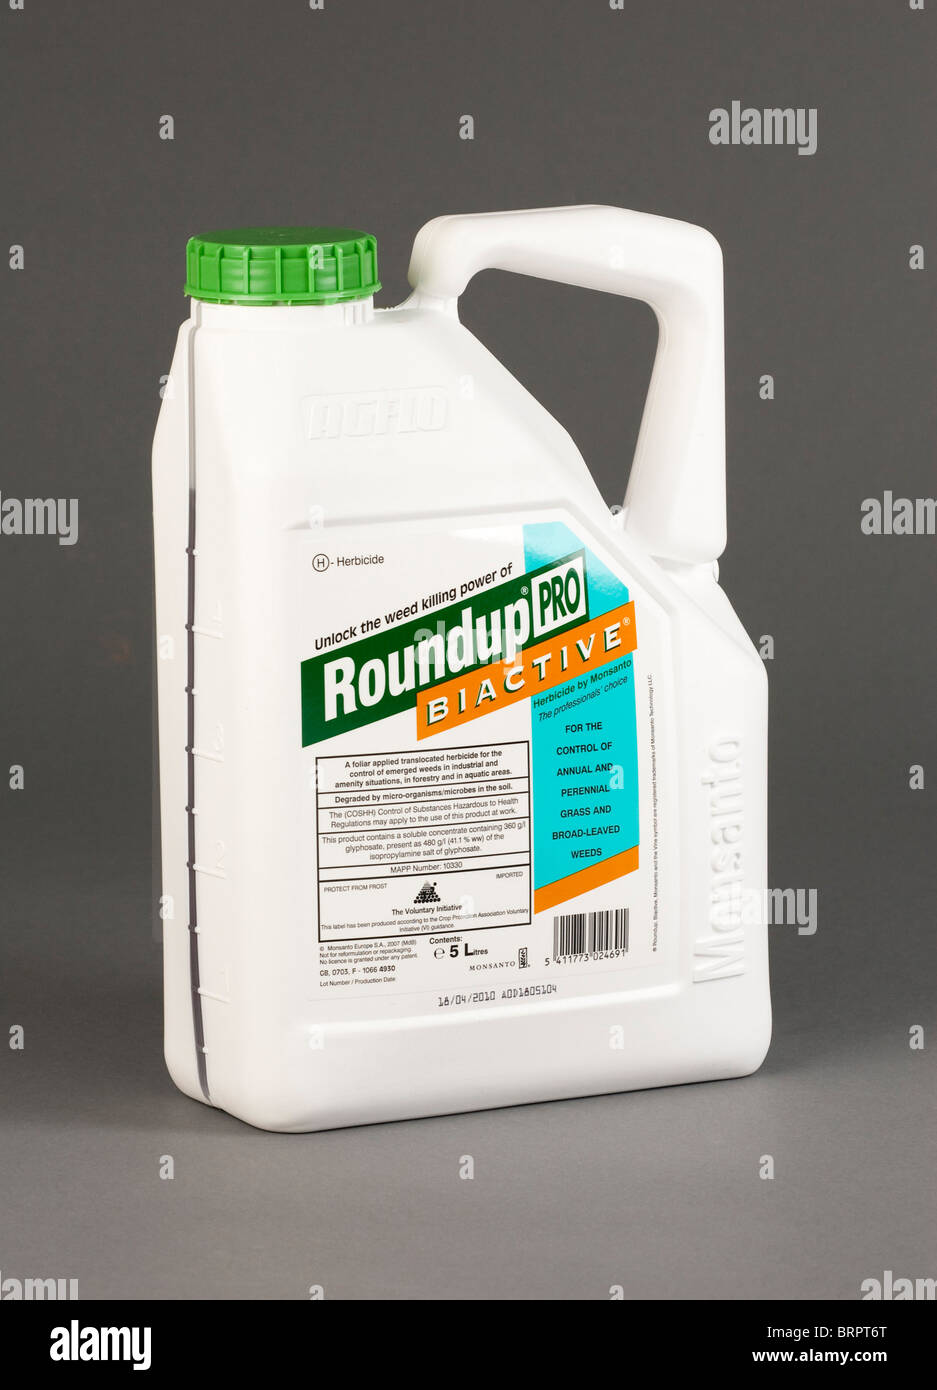 Roundup ProBiactive weedkiller made by Monsanto Stock Photo